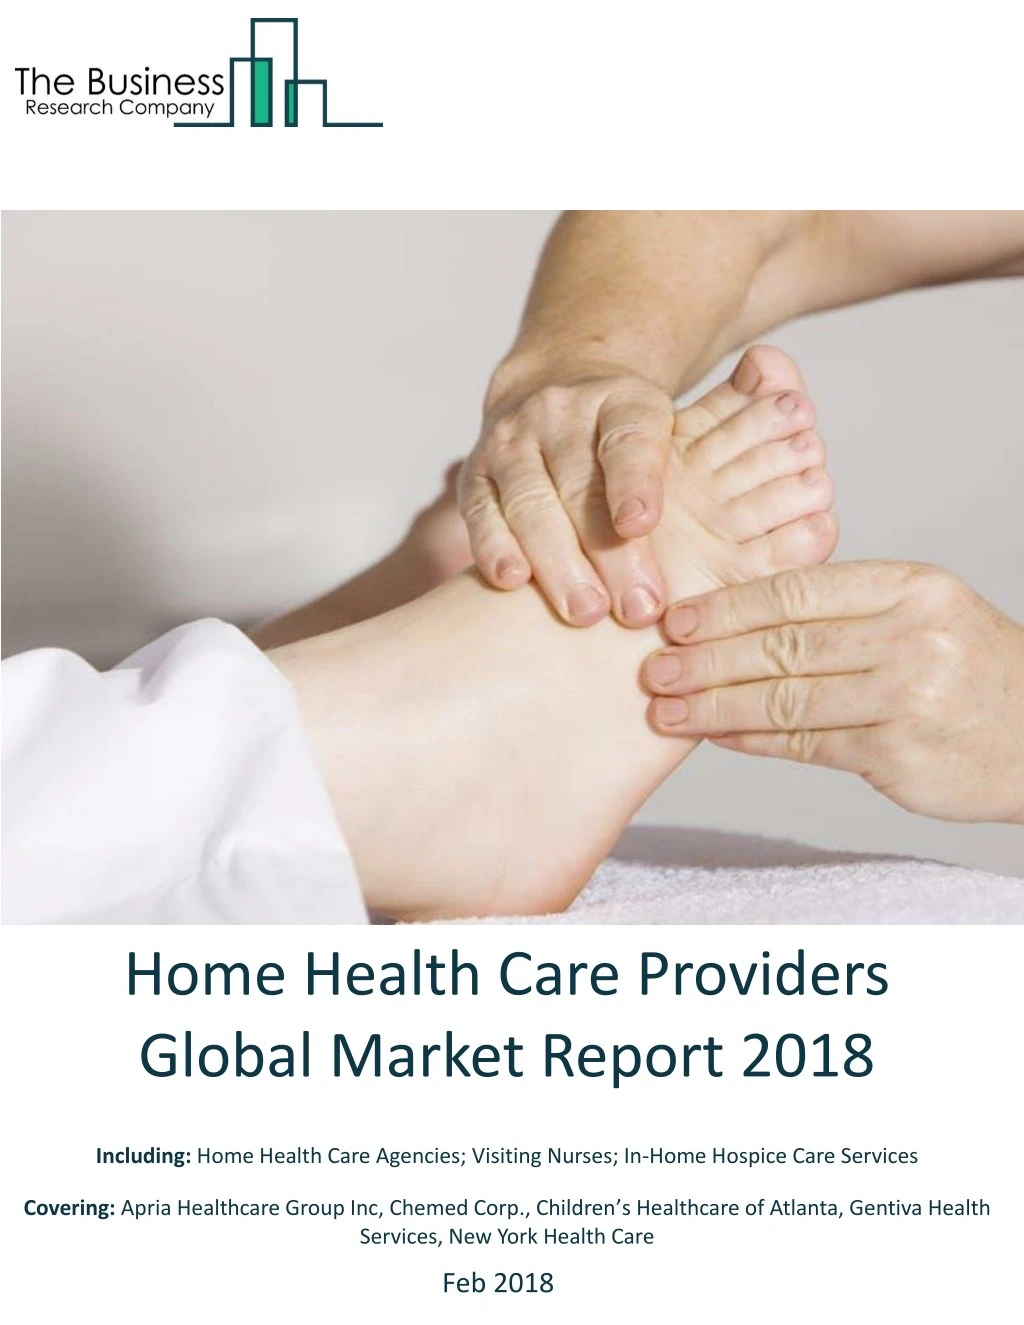 home health care providers global market report